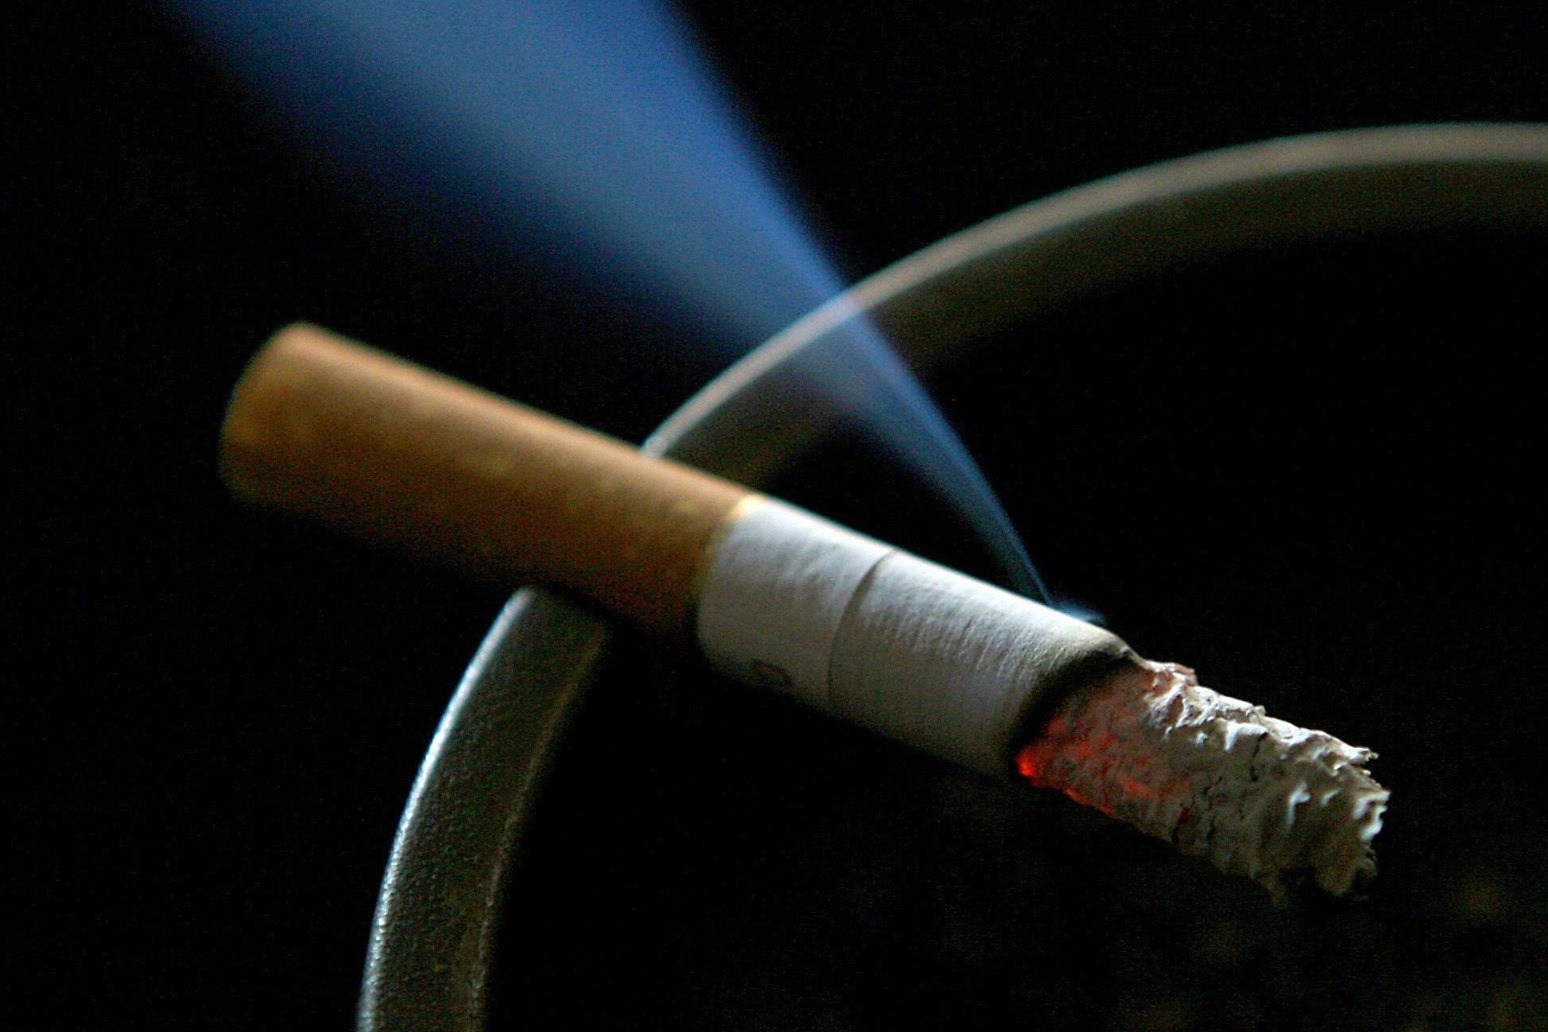 Smoking should be banned outside pubs and cafes during pandemic, councils say 